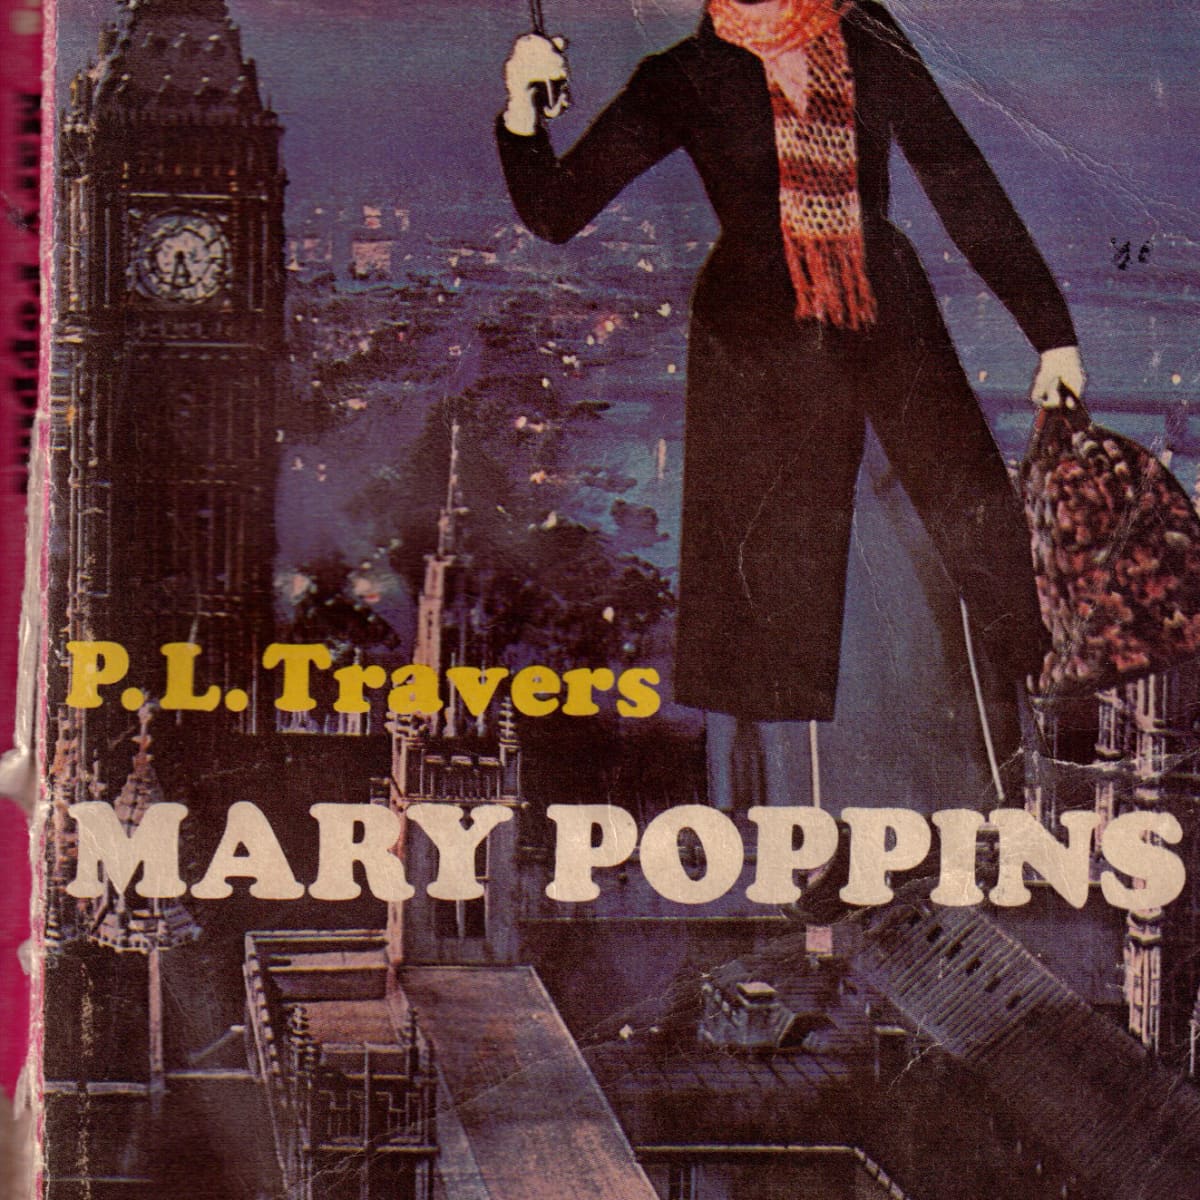 Mary Poppins (Mary Poppins, #1) by P.L. Travers